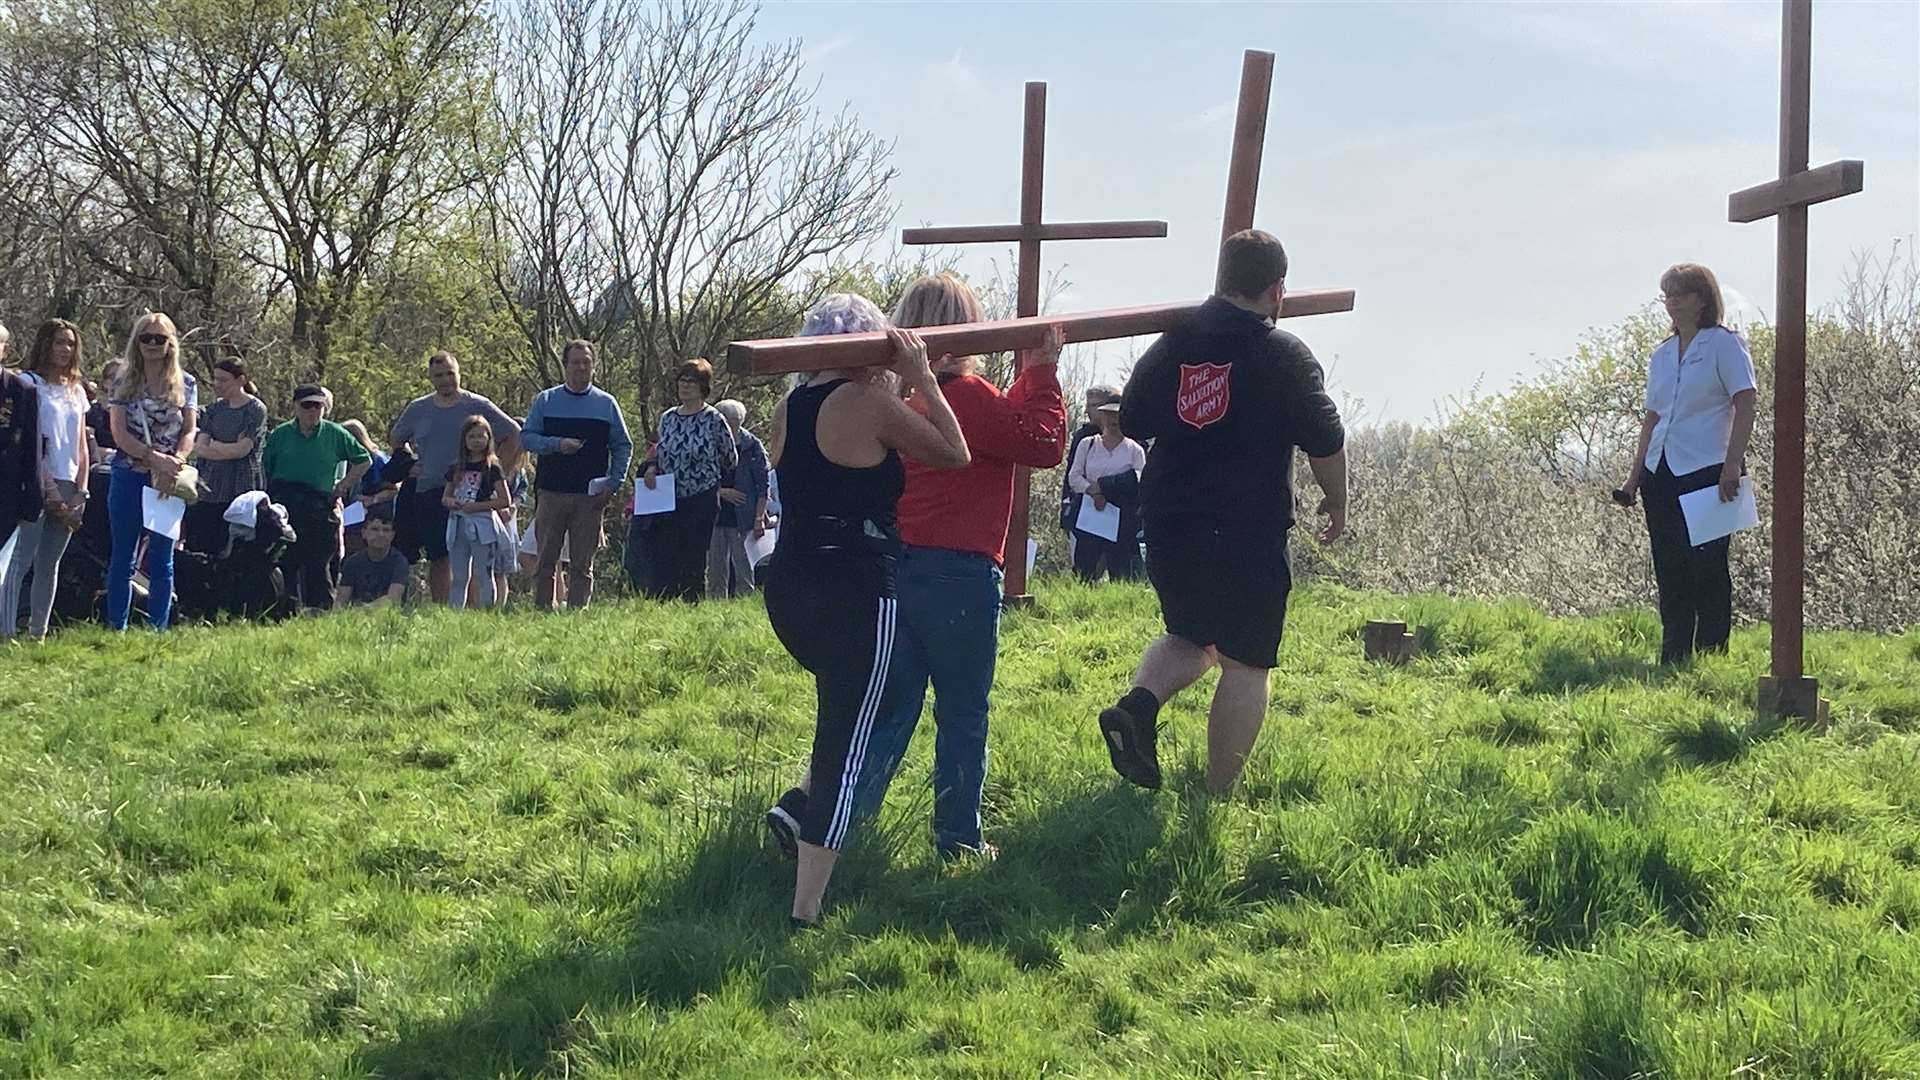 The final cross arrives for the Good Friday Easter service at Bunny Bank, Minster, Sheppey